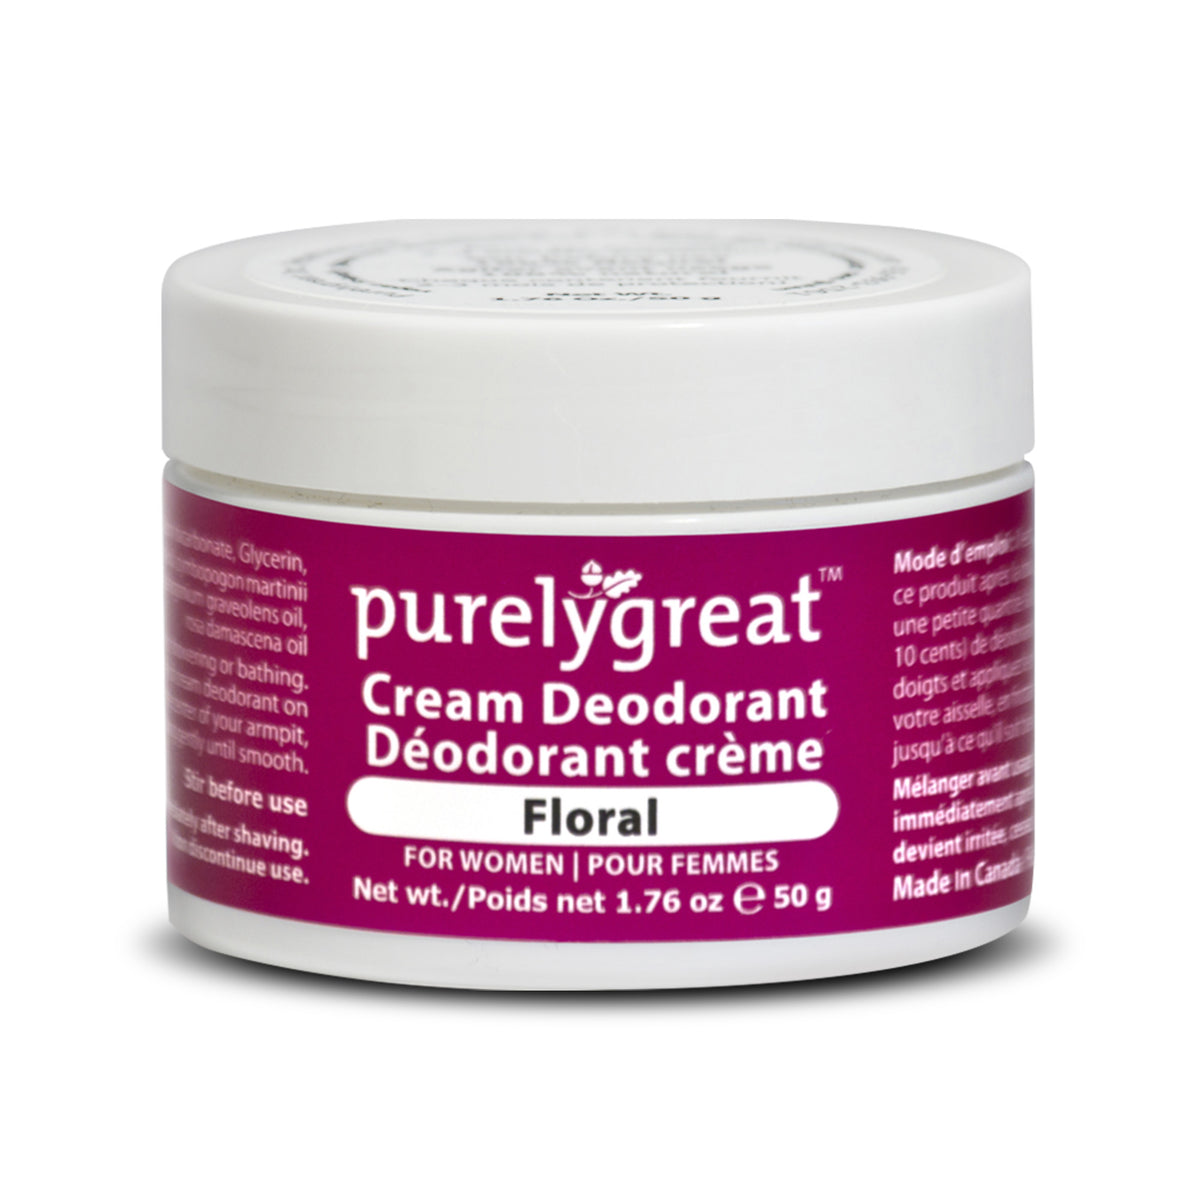 Purelygreat Natural Products